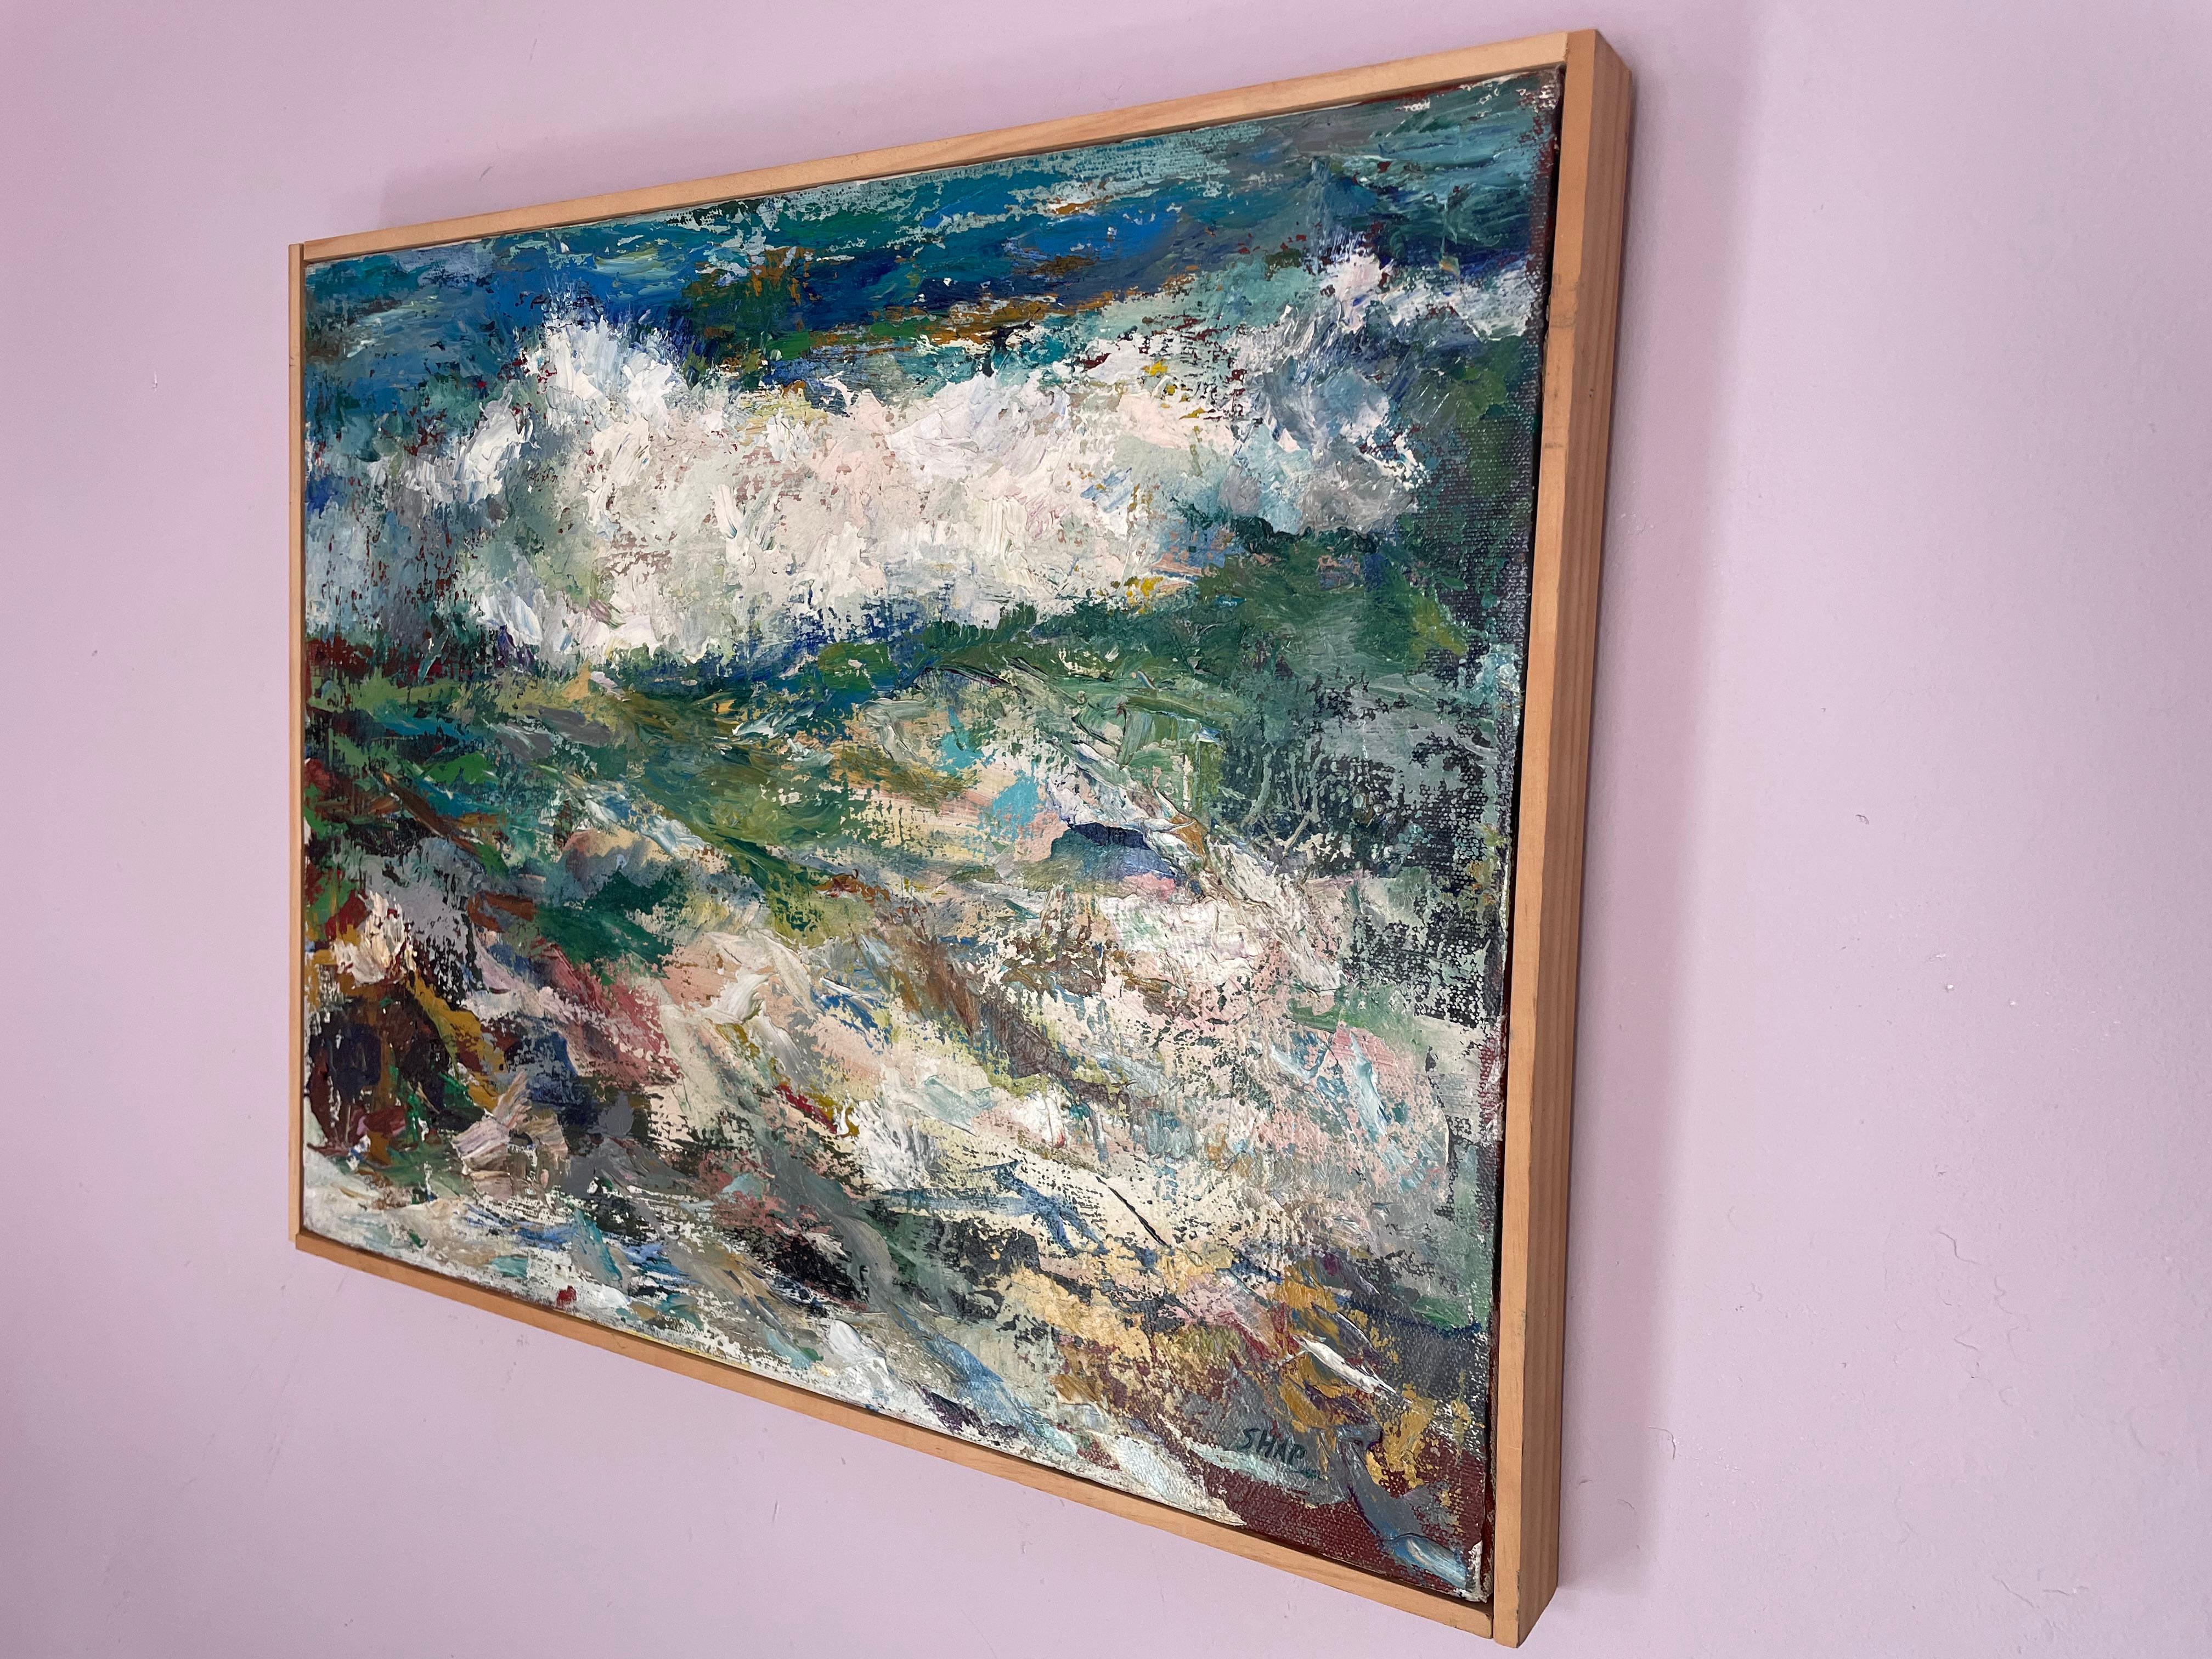 Original oil painting by celebrated, twentieth-century California landscape painter, Ronald Shap. A beautiful, abstracted view of the Pacific Ocean. 18x14 inch canvas. Signed.

Simple, 1/4 inch wood frame tacked to canvas, believed to be made by